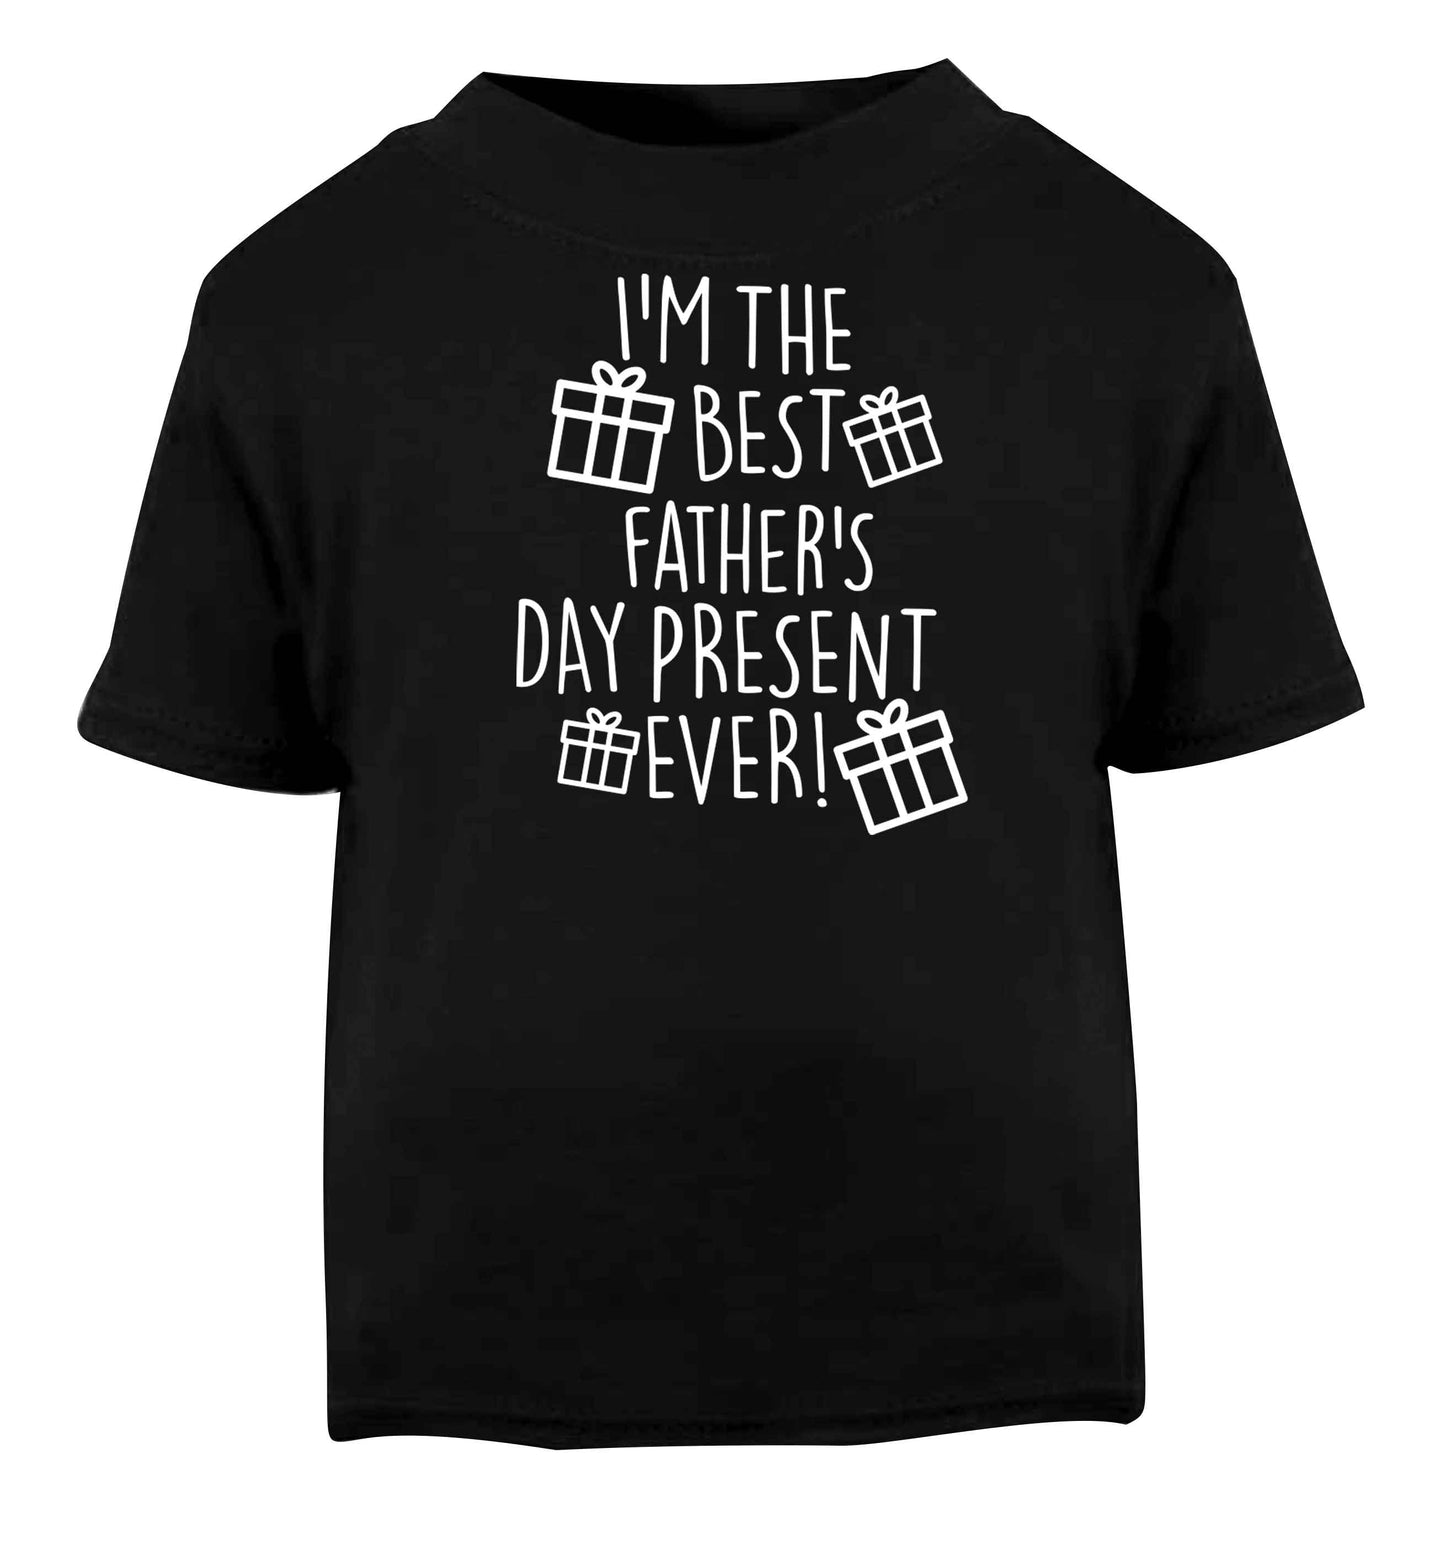 I'm the best father's day present ever!| Baby Toddler Tshirt